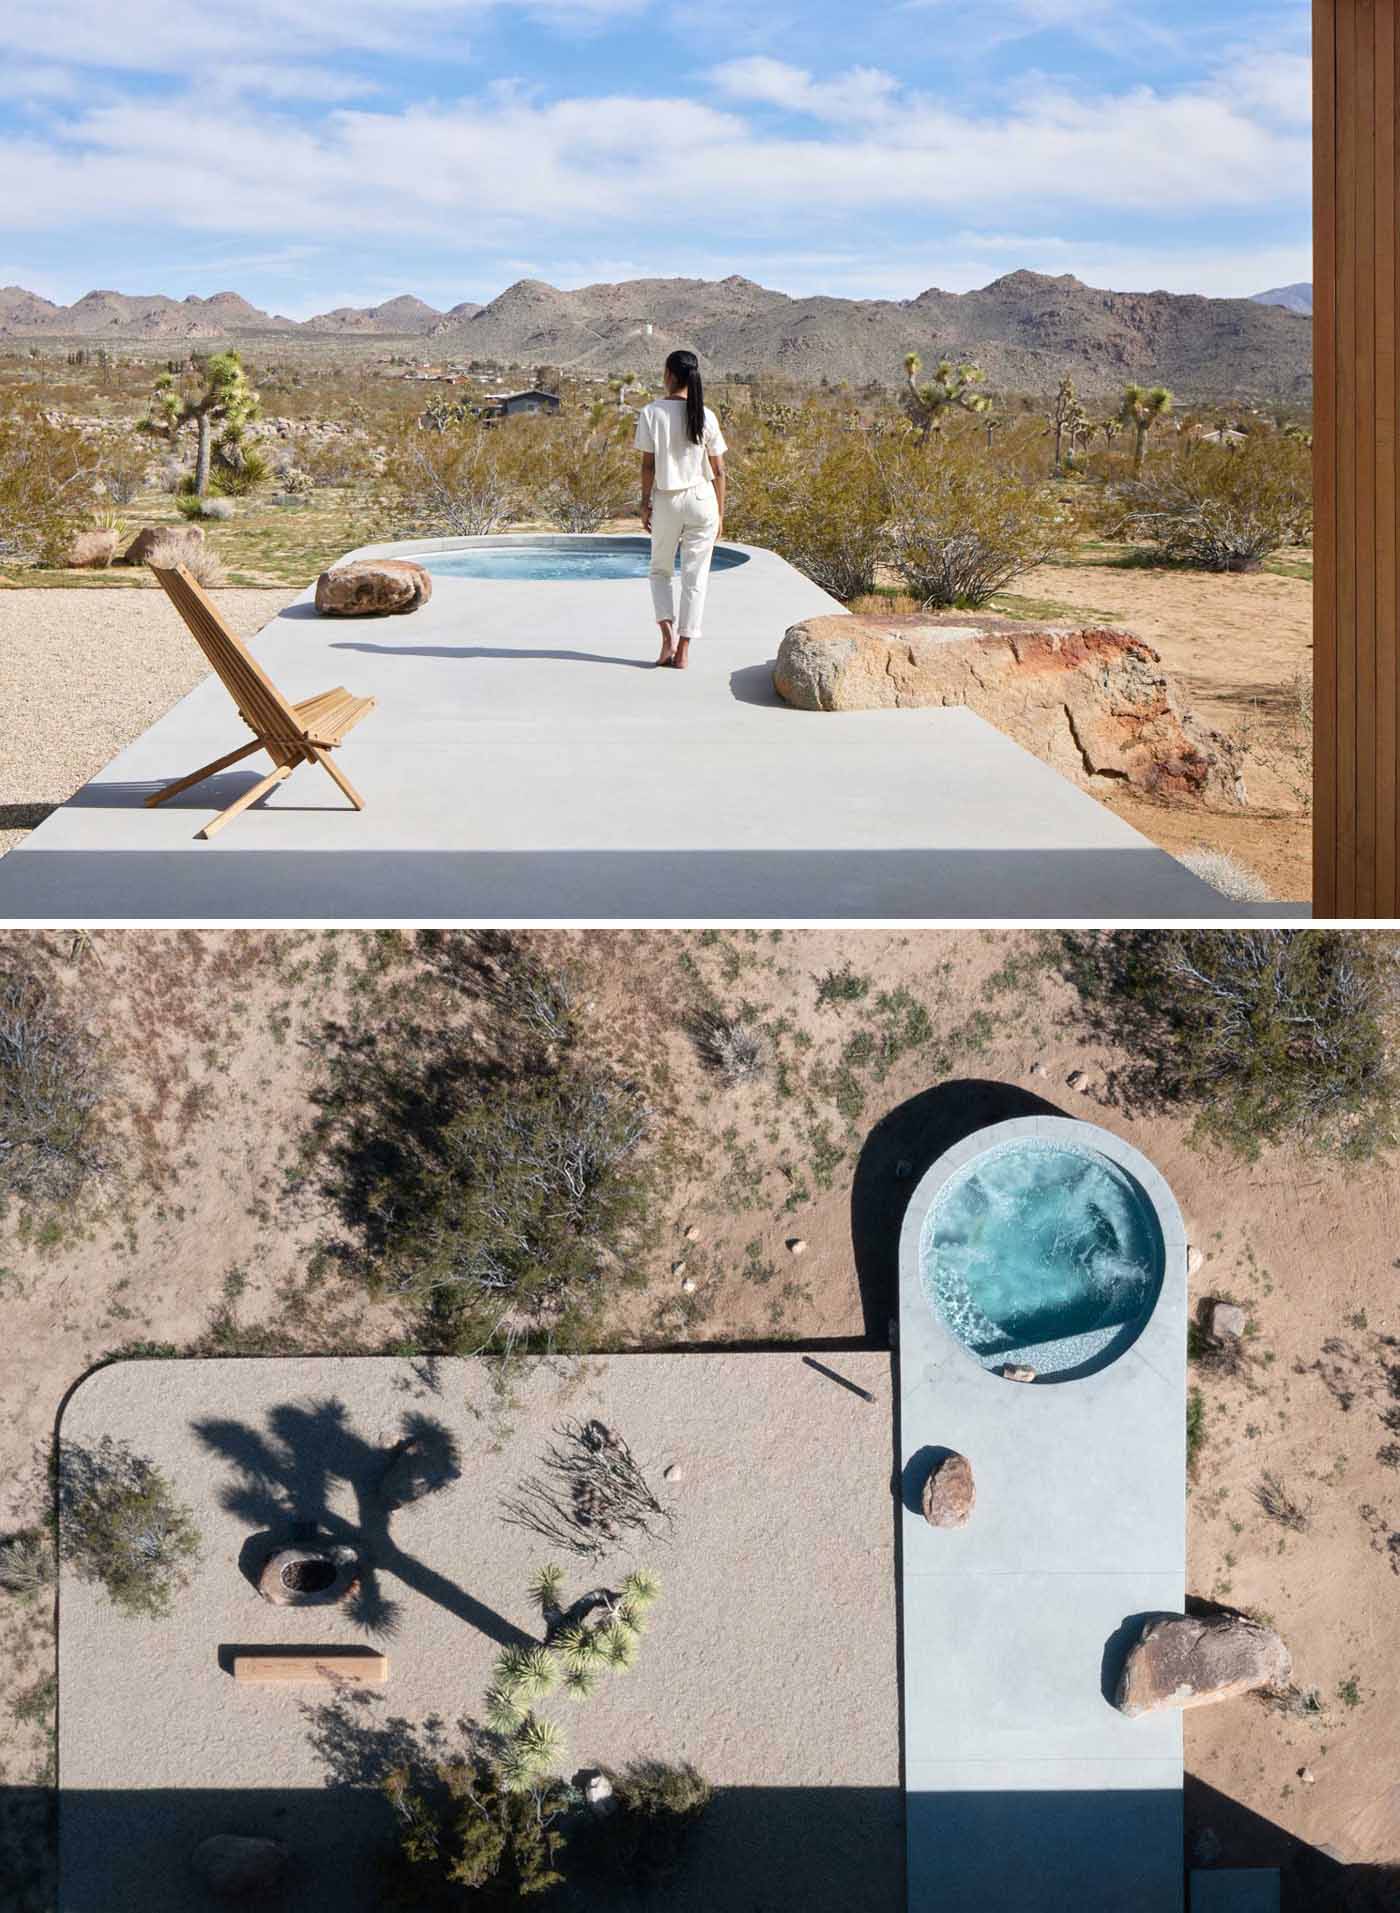 A concrete platform extends perpendicularly from the breezeway landing to the plunge pool, which has a monolithic and geometric form.